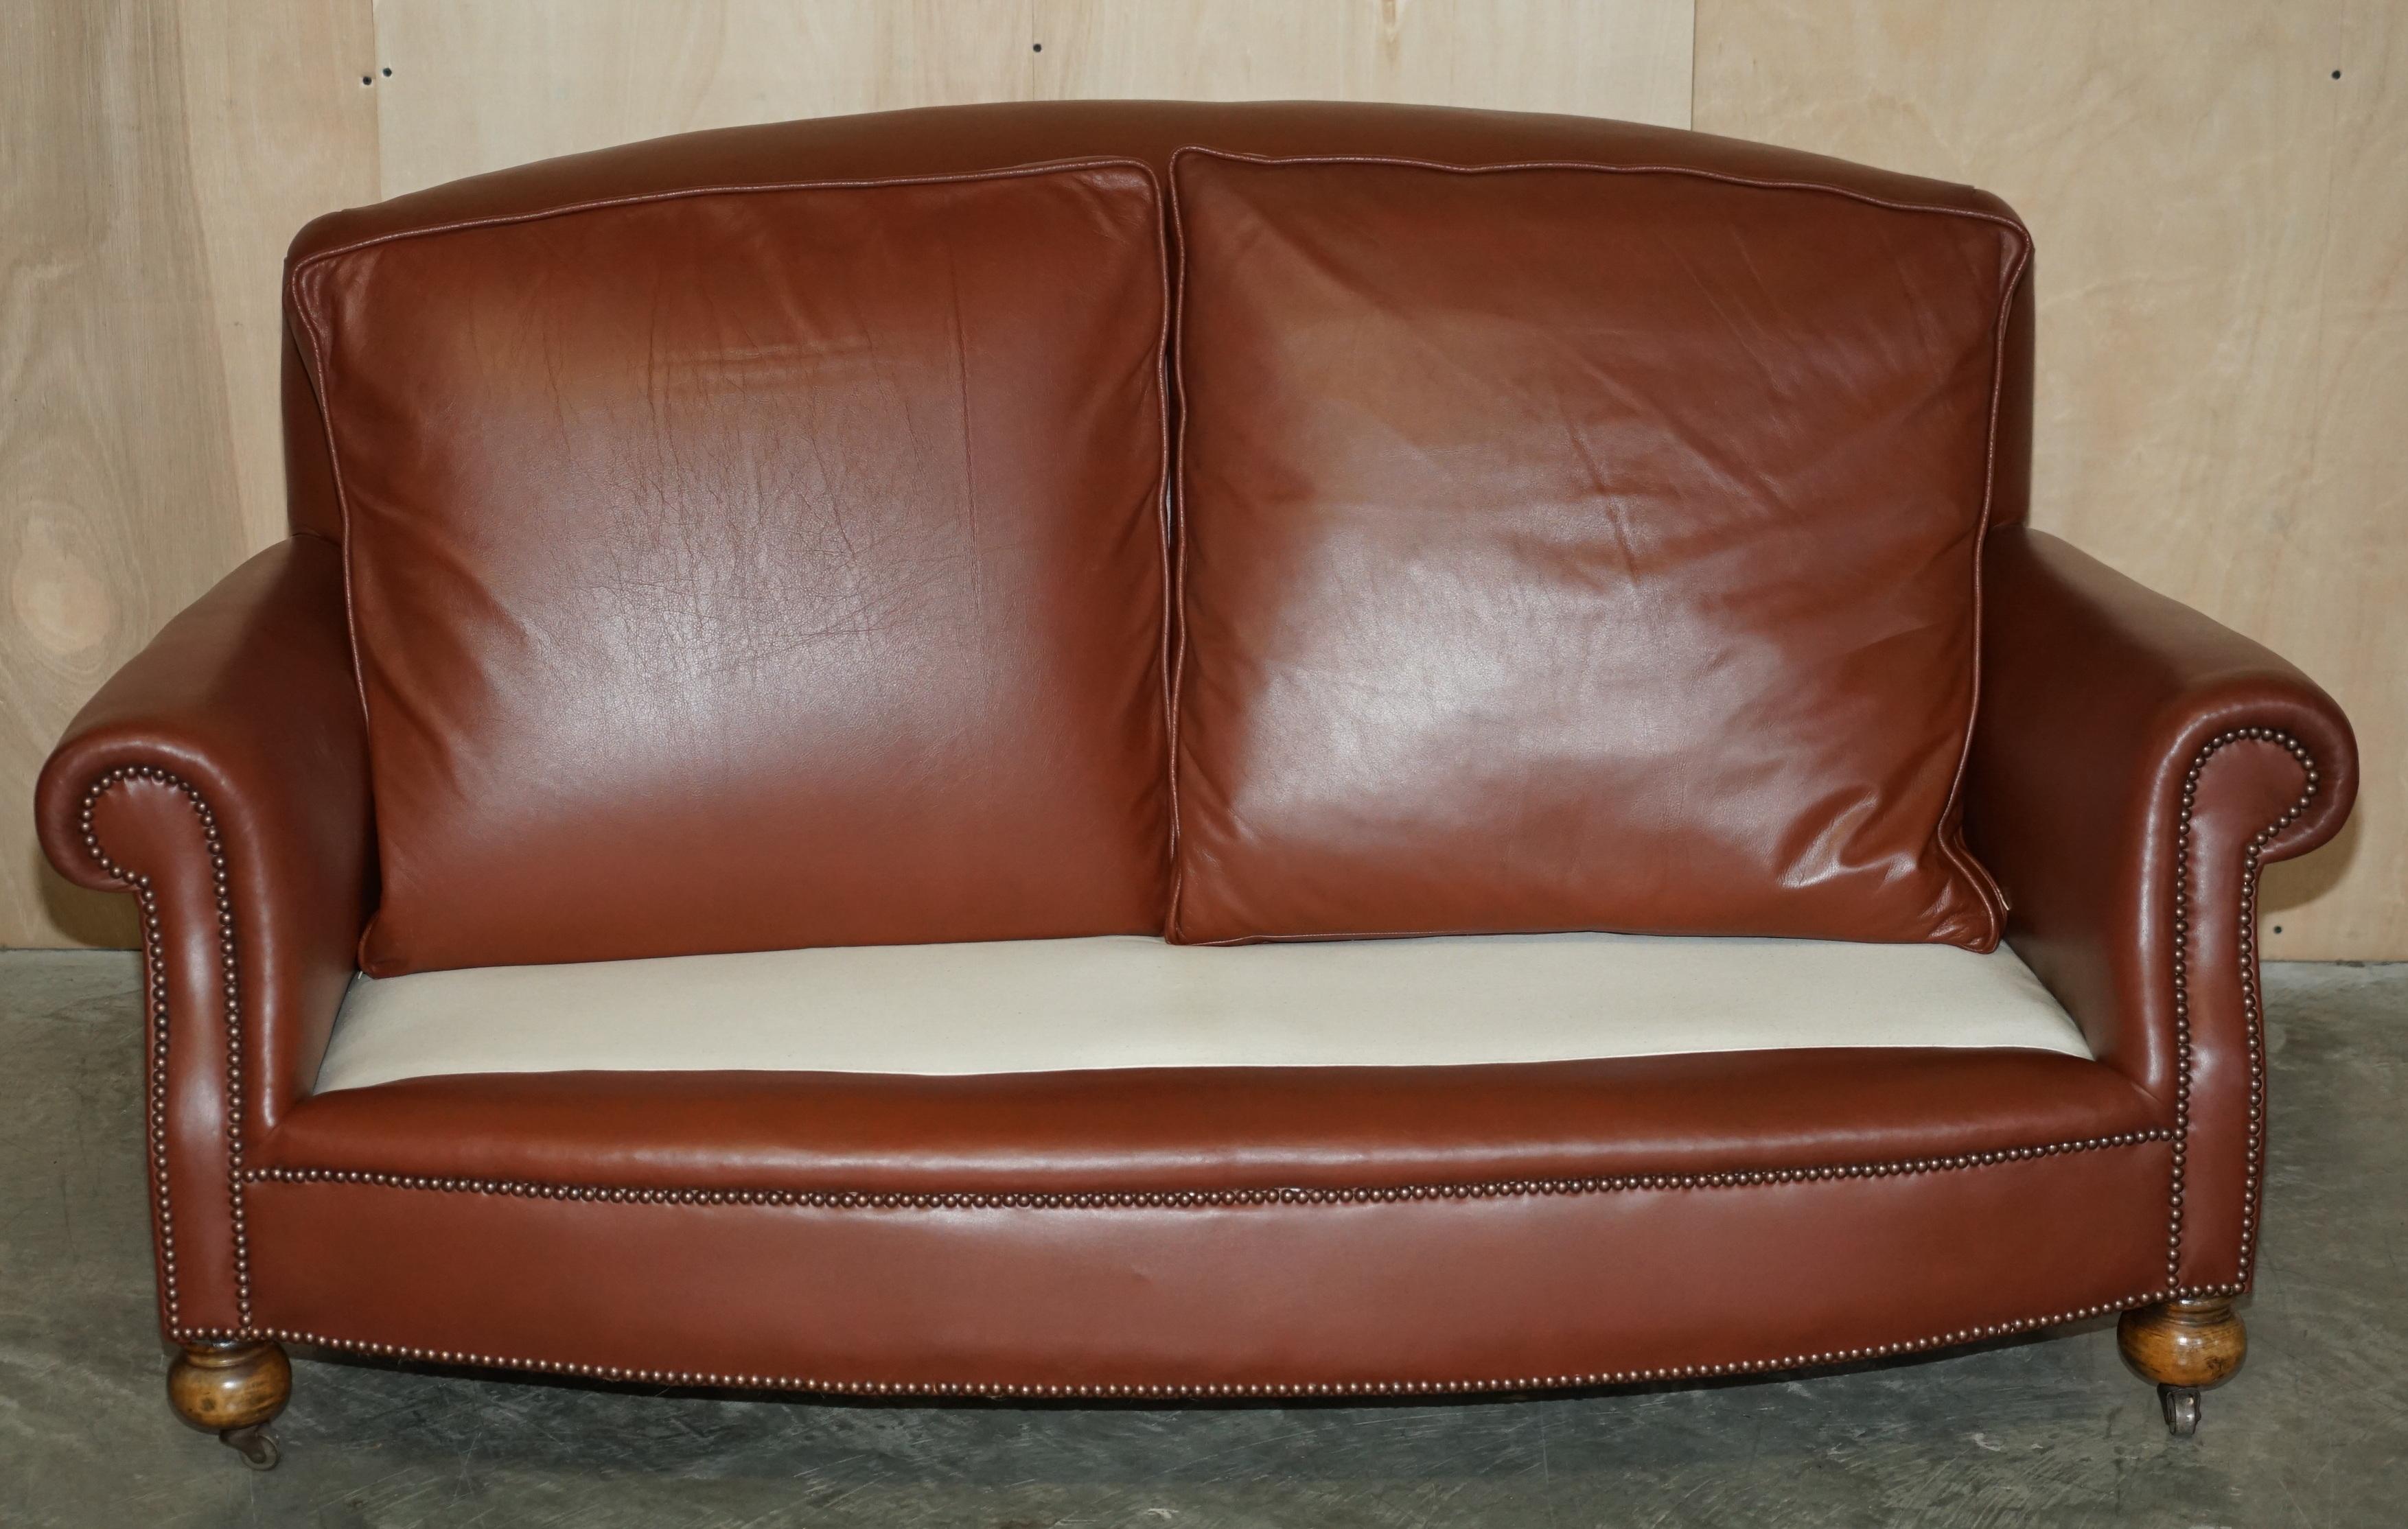 Antique 1910 Edwardian Brown Leather Club Sofa with Feather Filled Seat Cushions For Sale 3